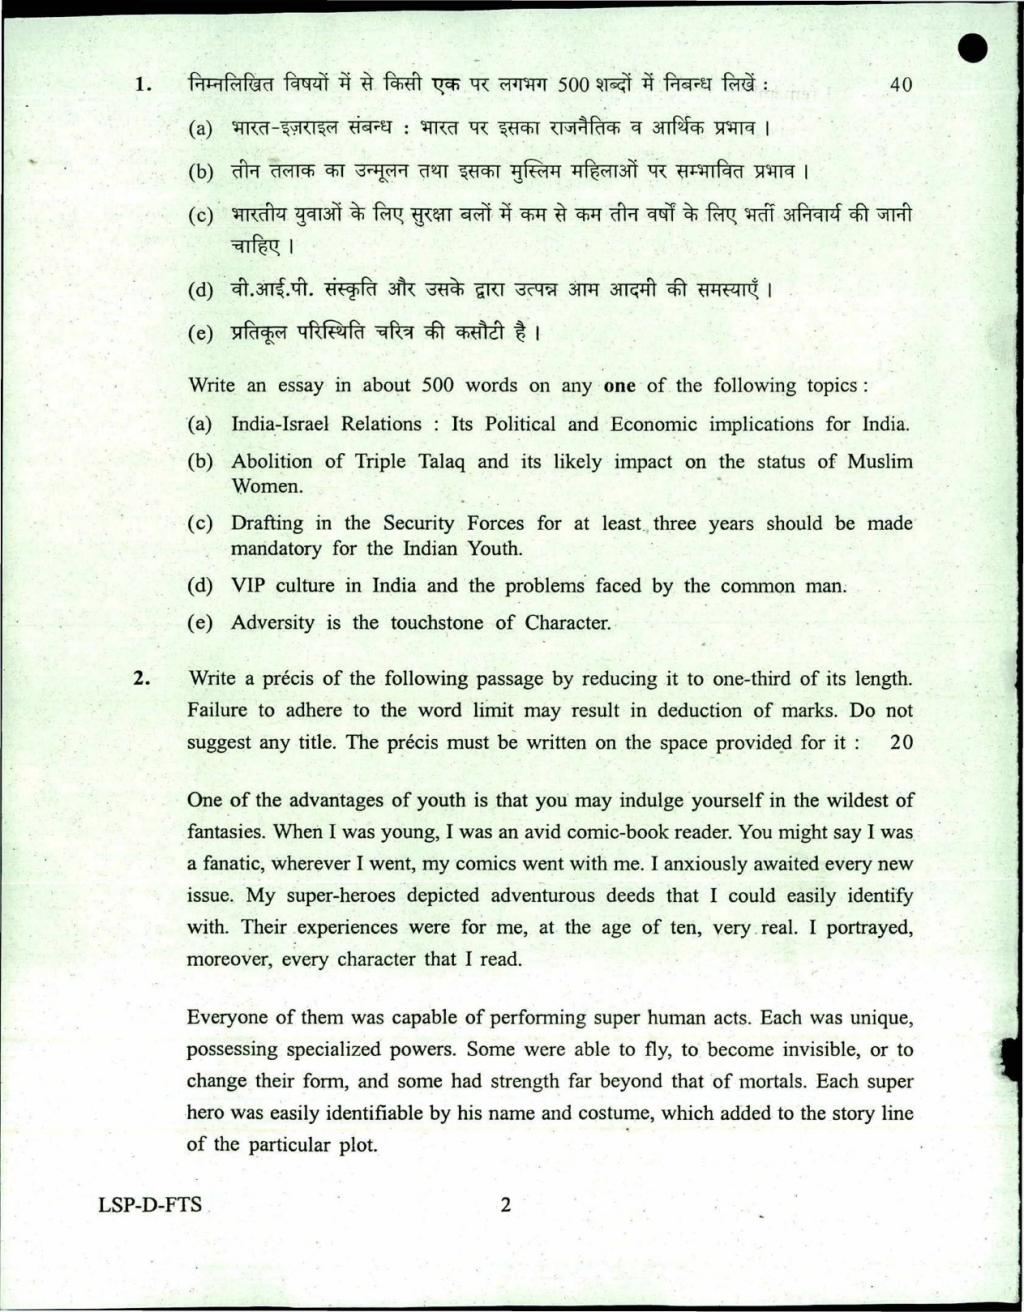 CISF Examination 2018 Question Paper II - Image 2